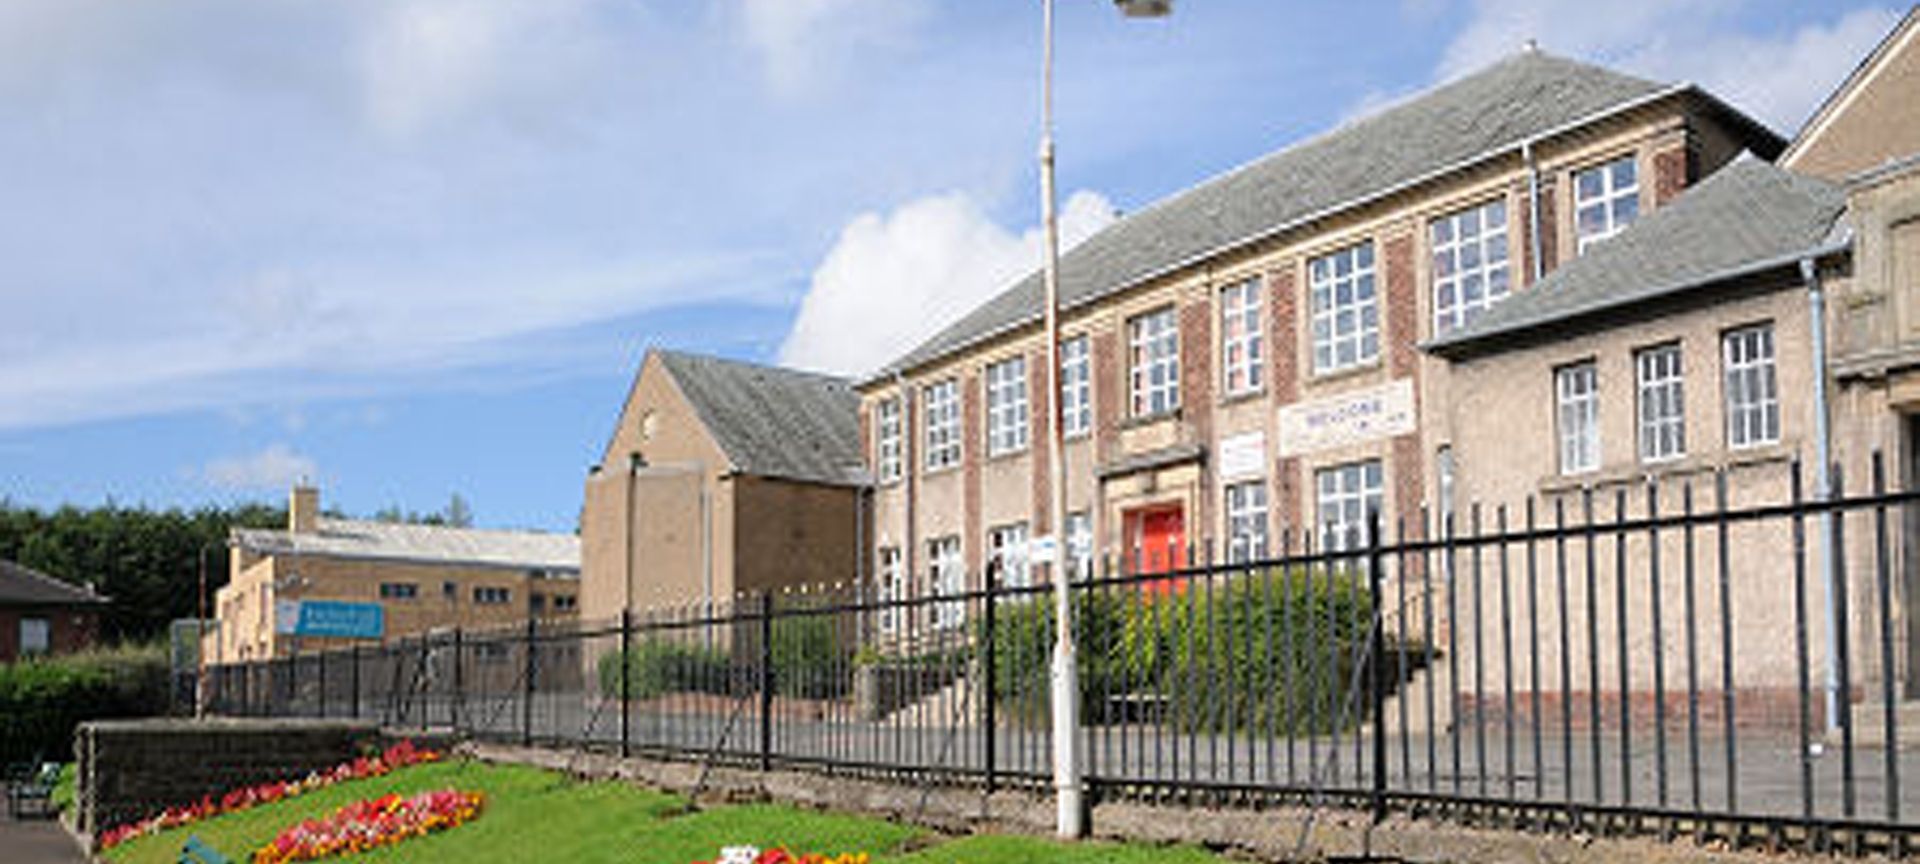 bowhill community centre